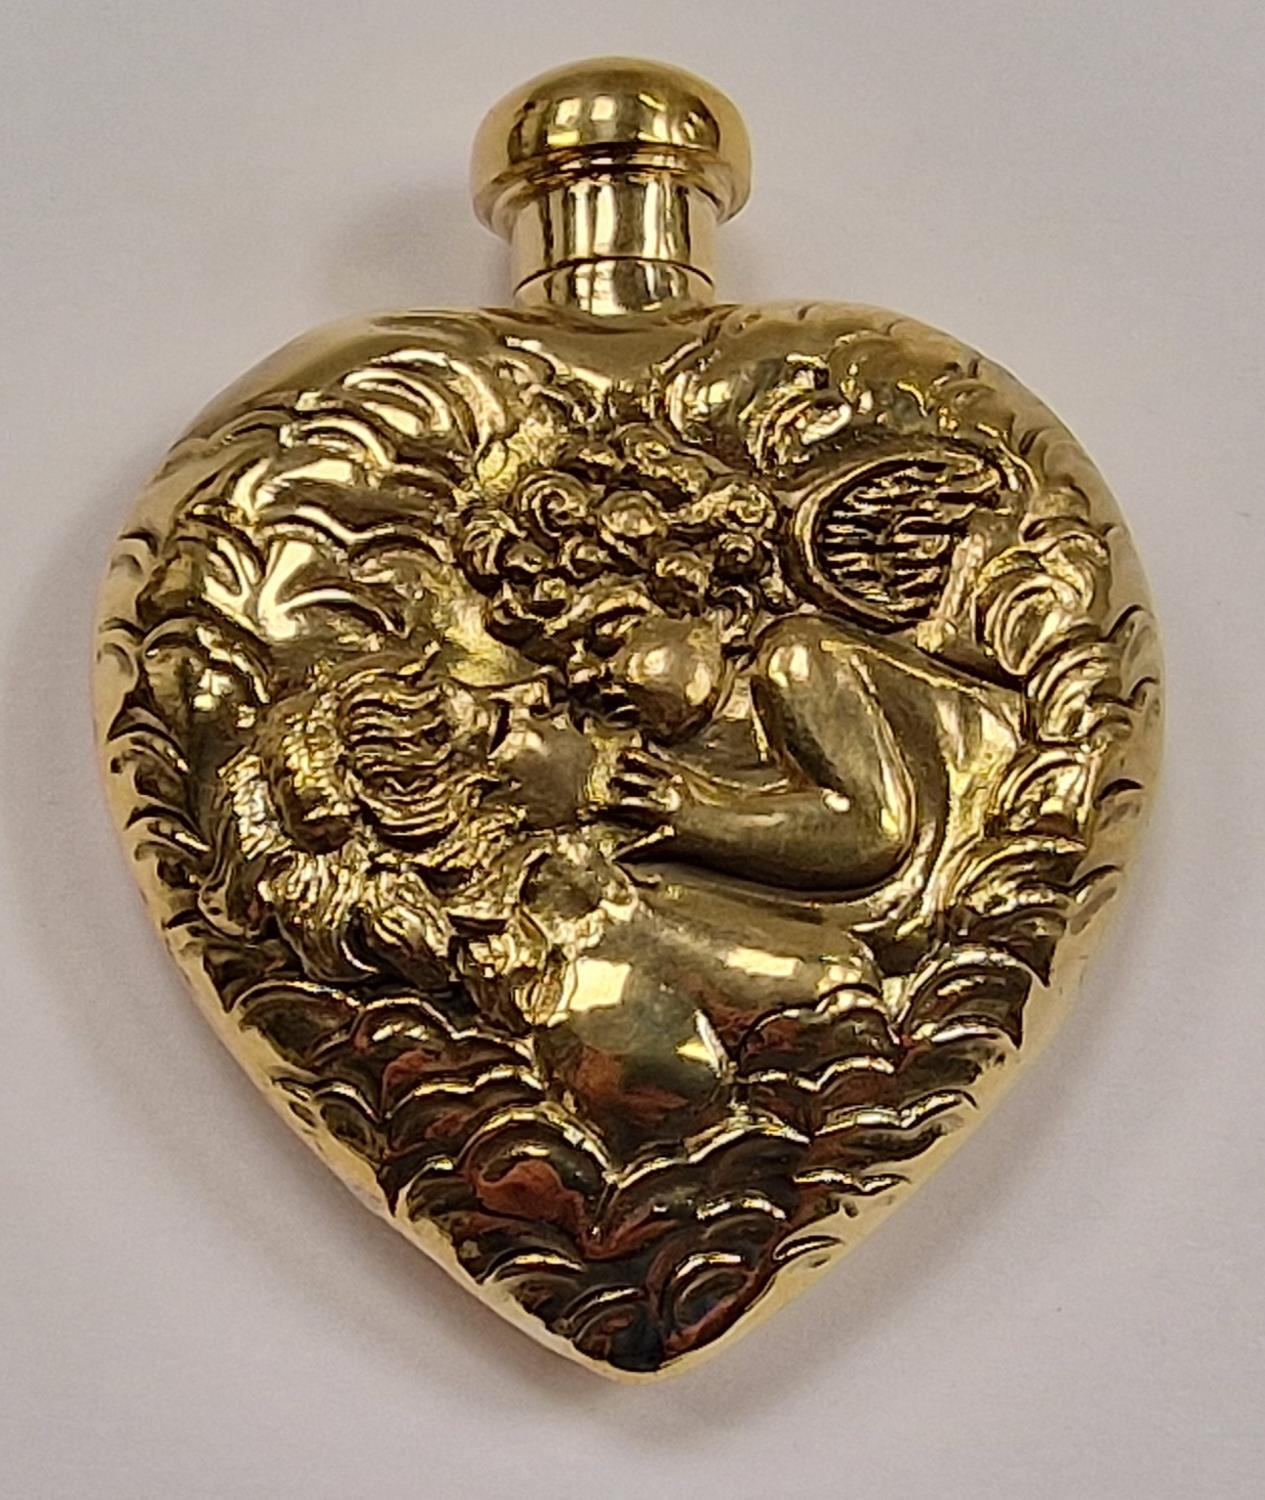 A brass perfume bottle with embossed decoration in the form of a heart.